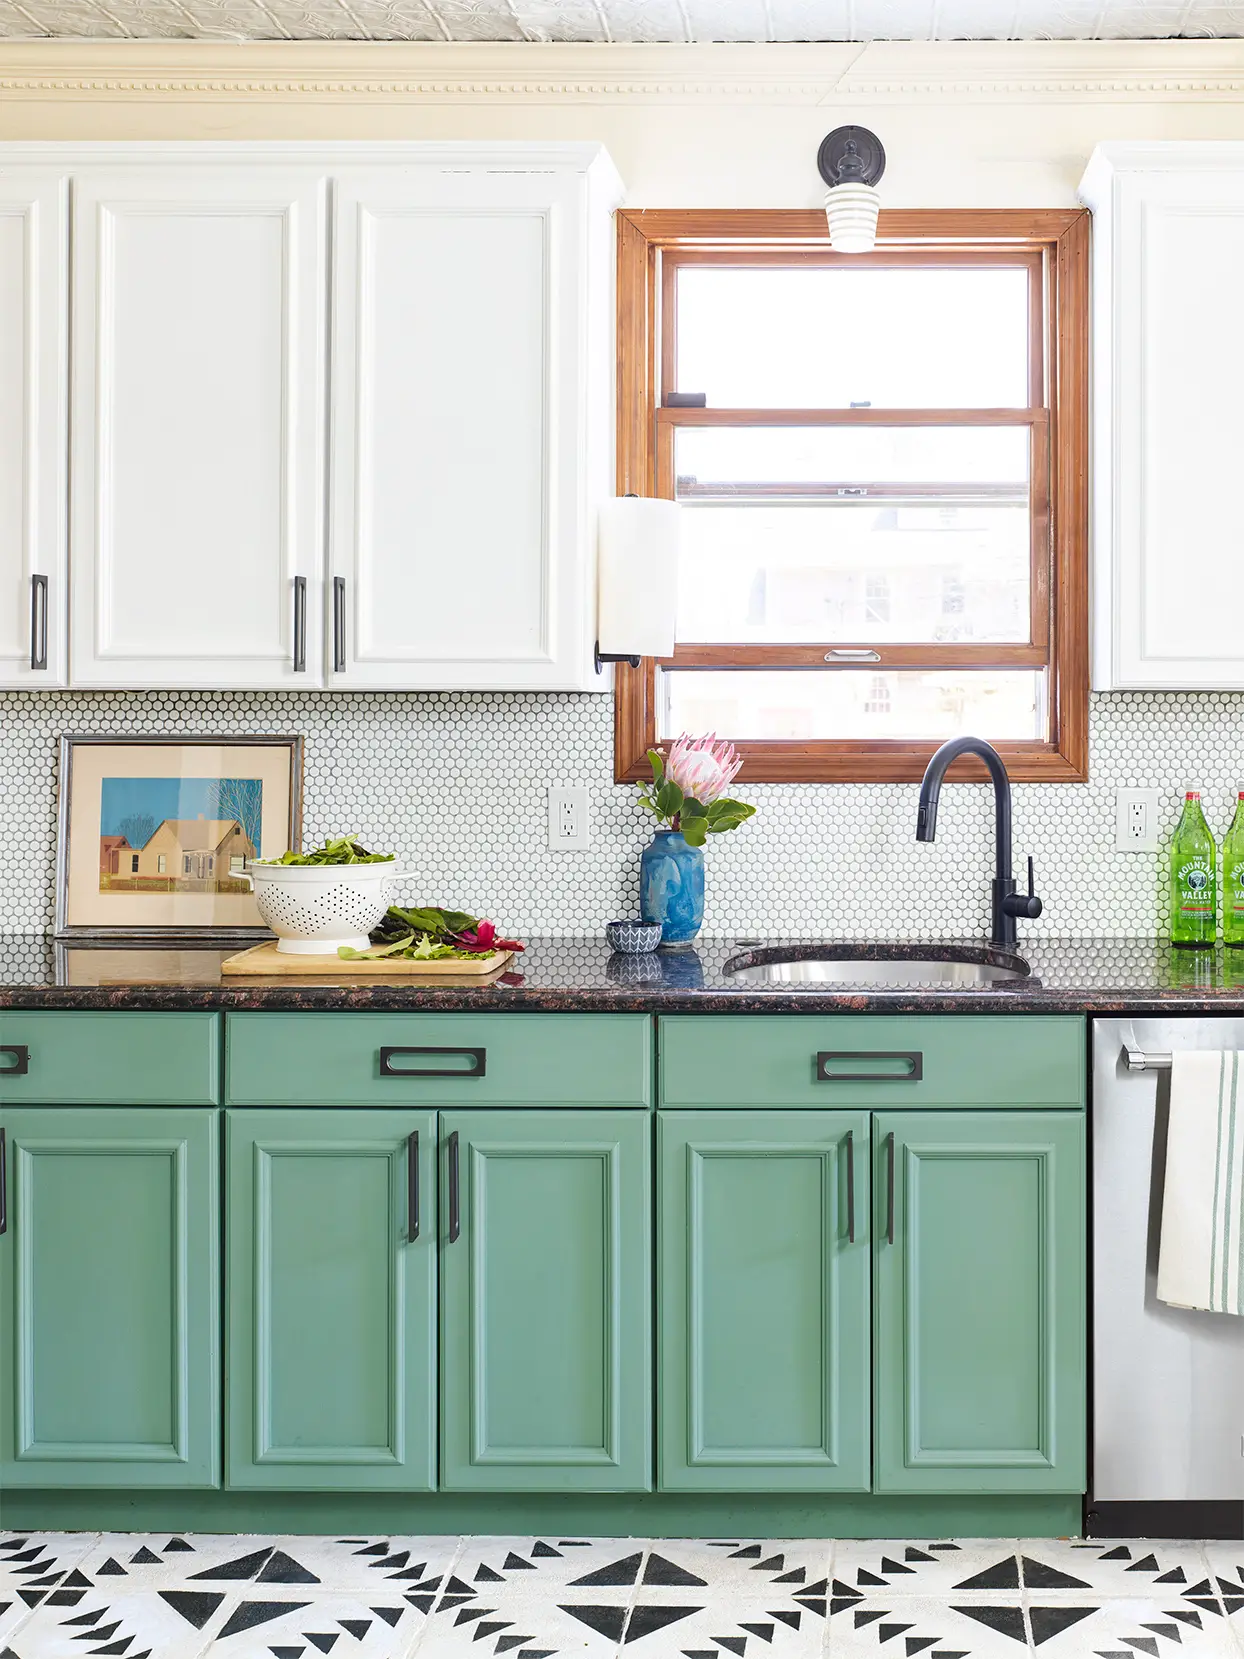 Our Favorite Budget Kitchen Remodeling Ideas Under $2000